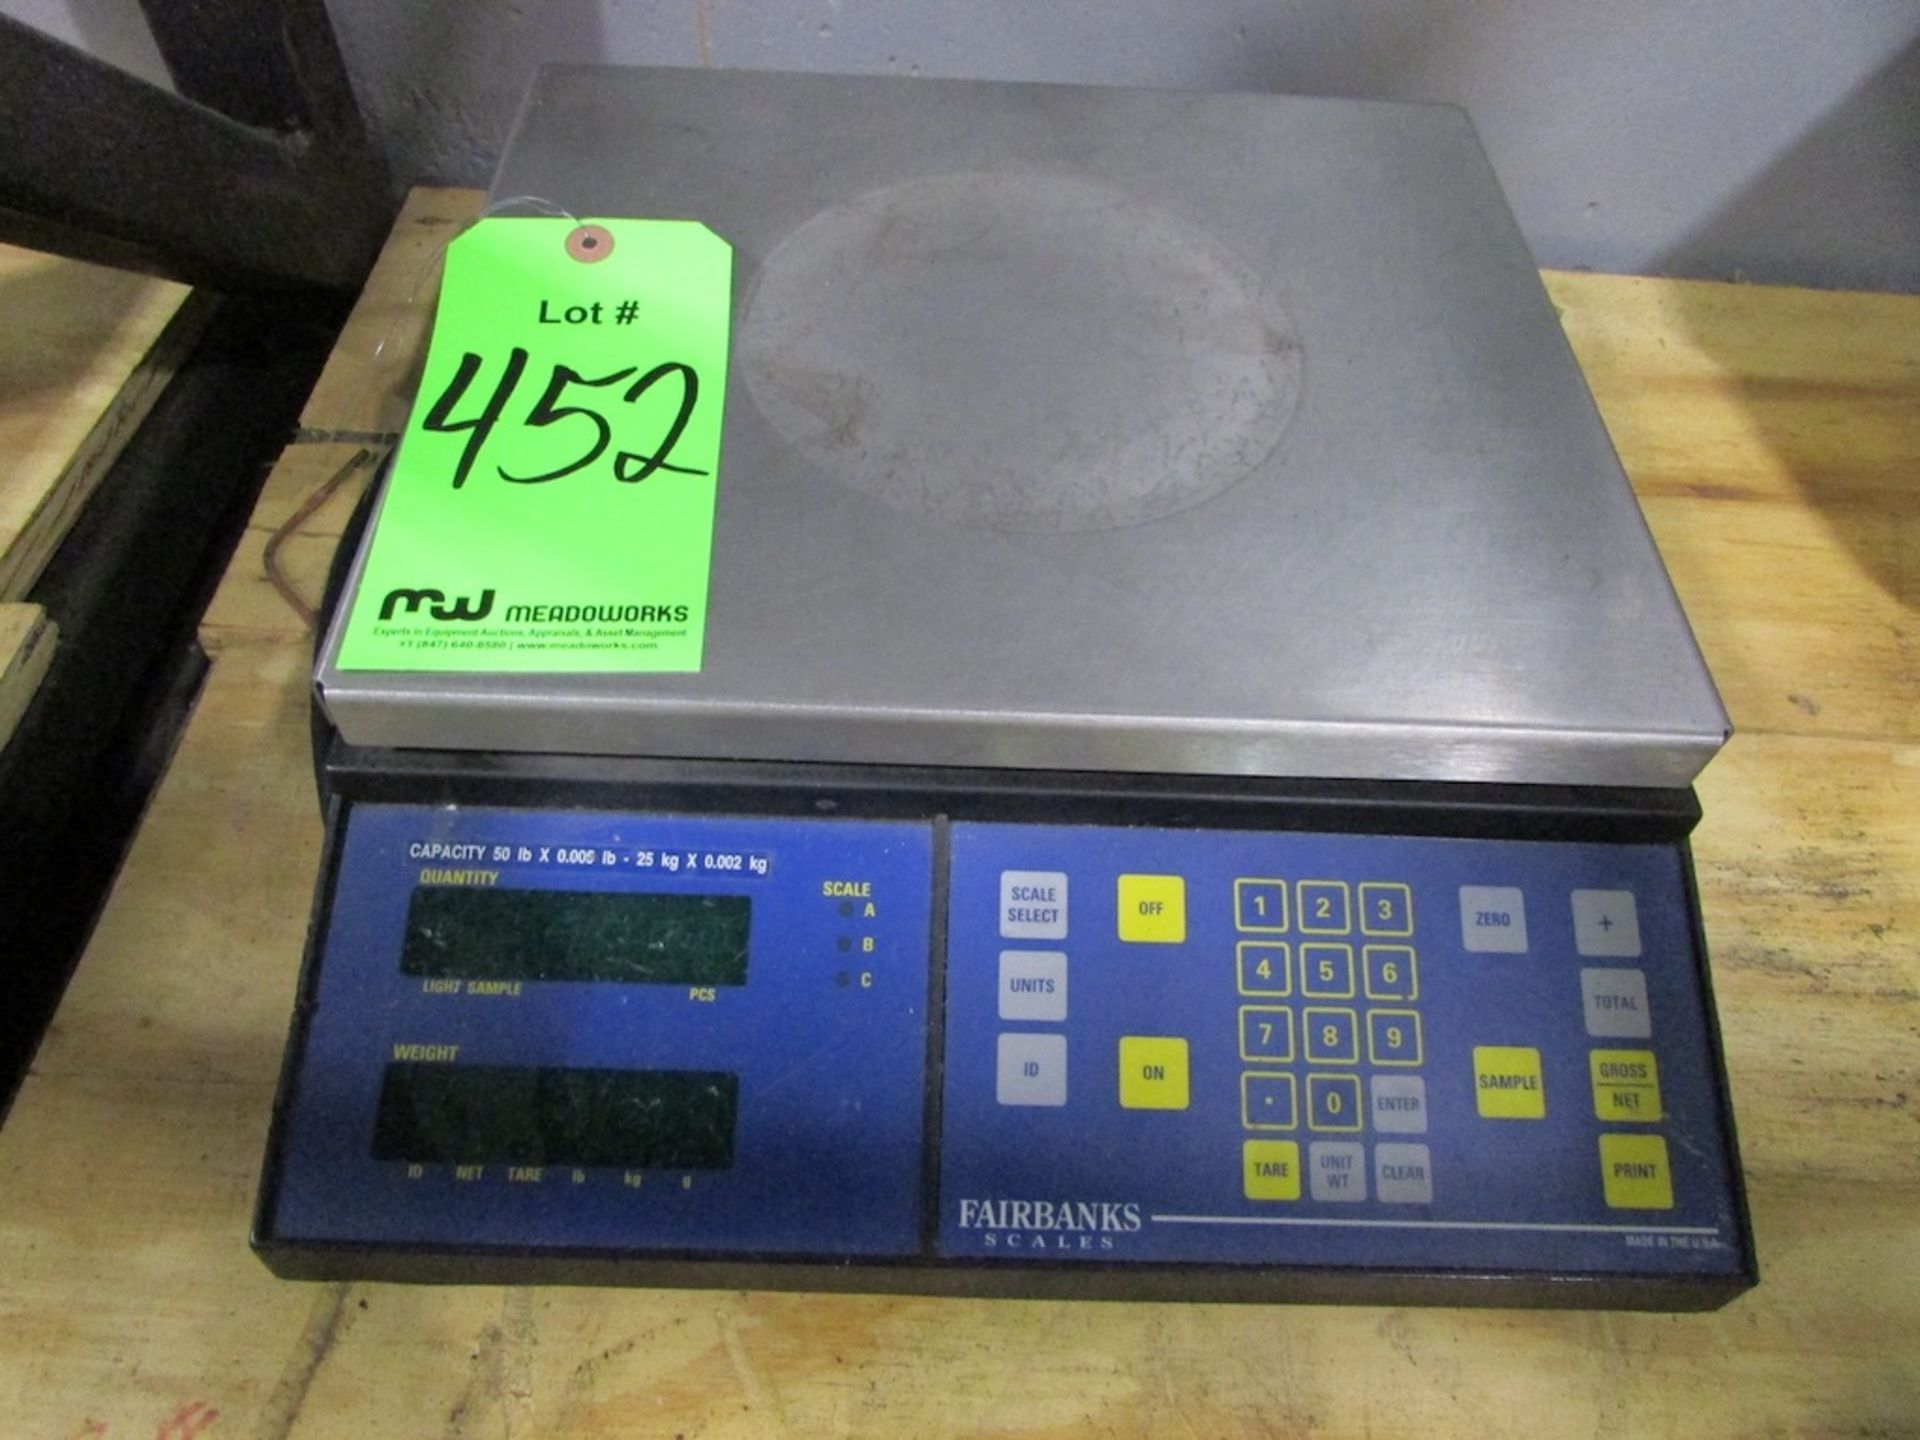 (1) Fairbanks Scales Model CTG-9850-C1 50 Lb. x .005 Lb. Digital Counting Scale - Image 2 of 5